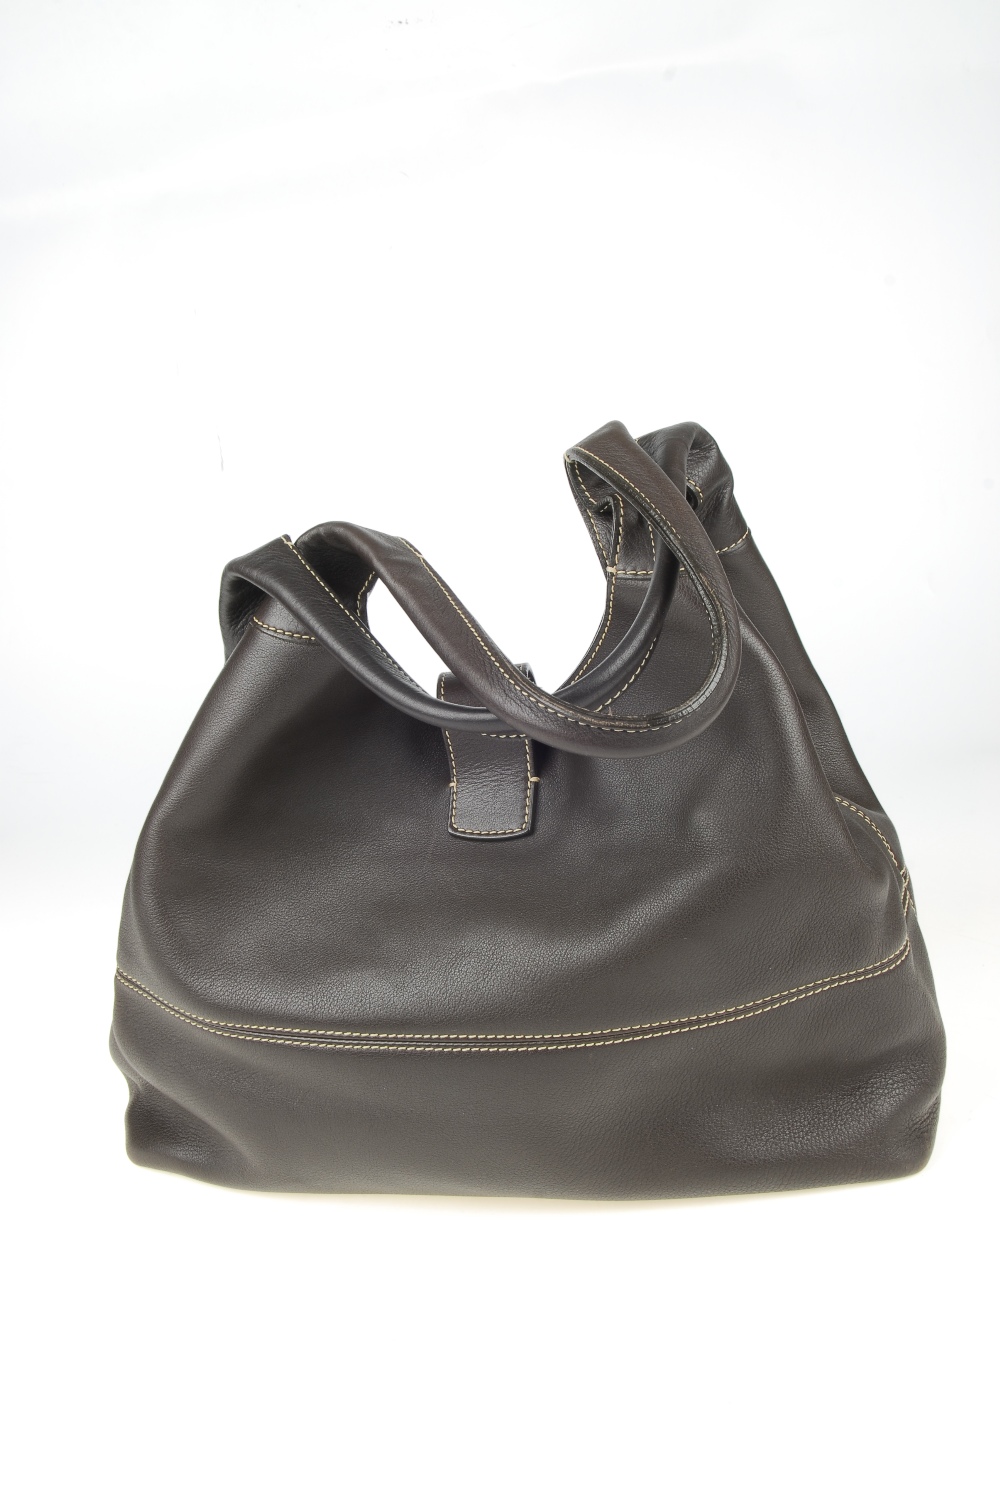 LORO PIANA - a brown leather hobo handbag. Designed from lightly grained dark brown leather with - Bild 12 aus 12